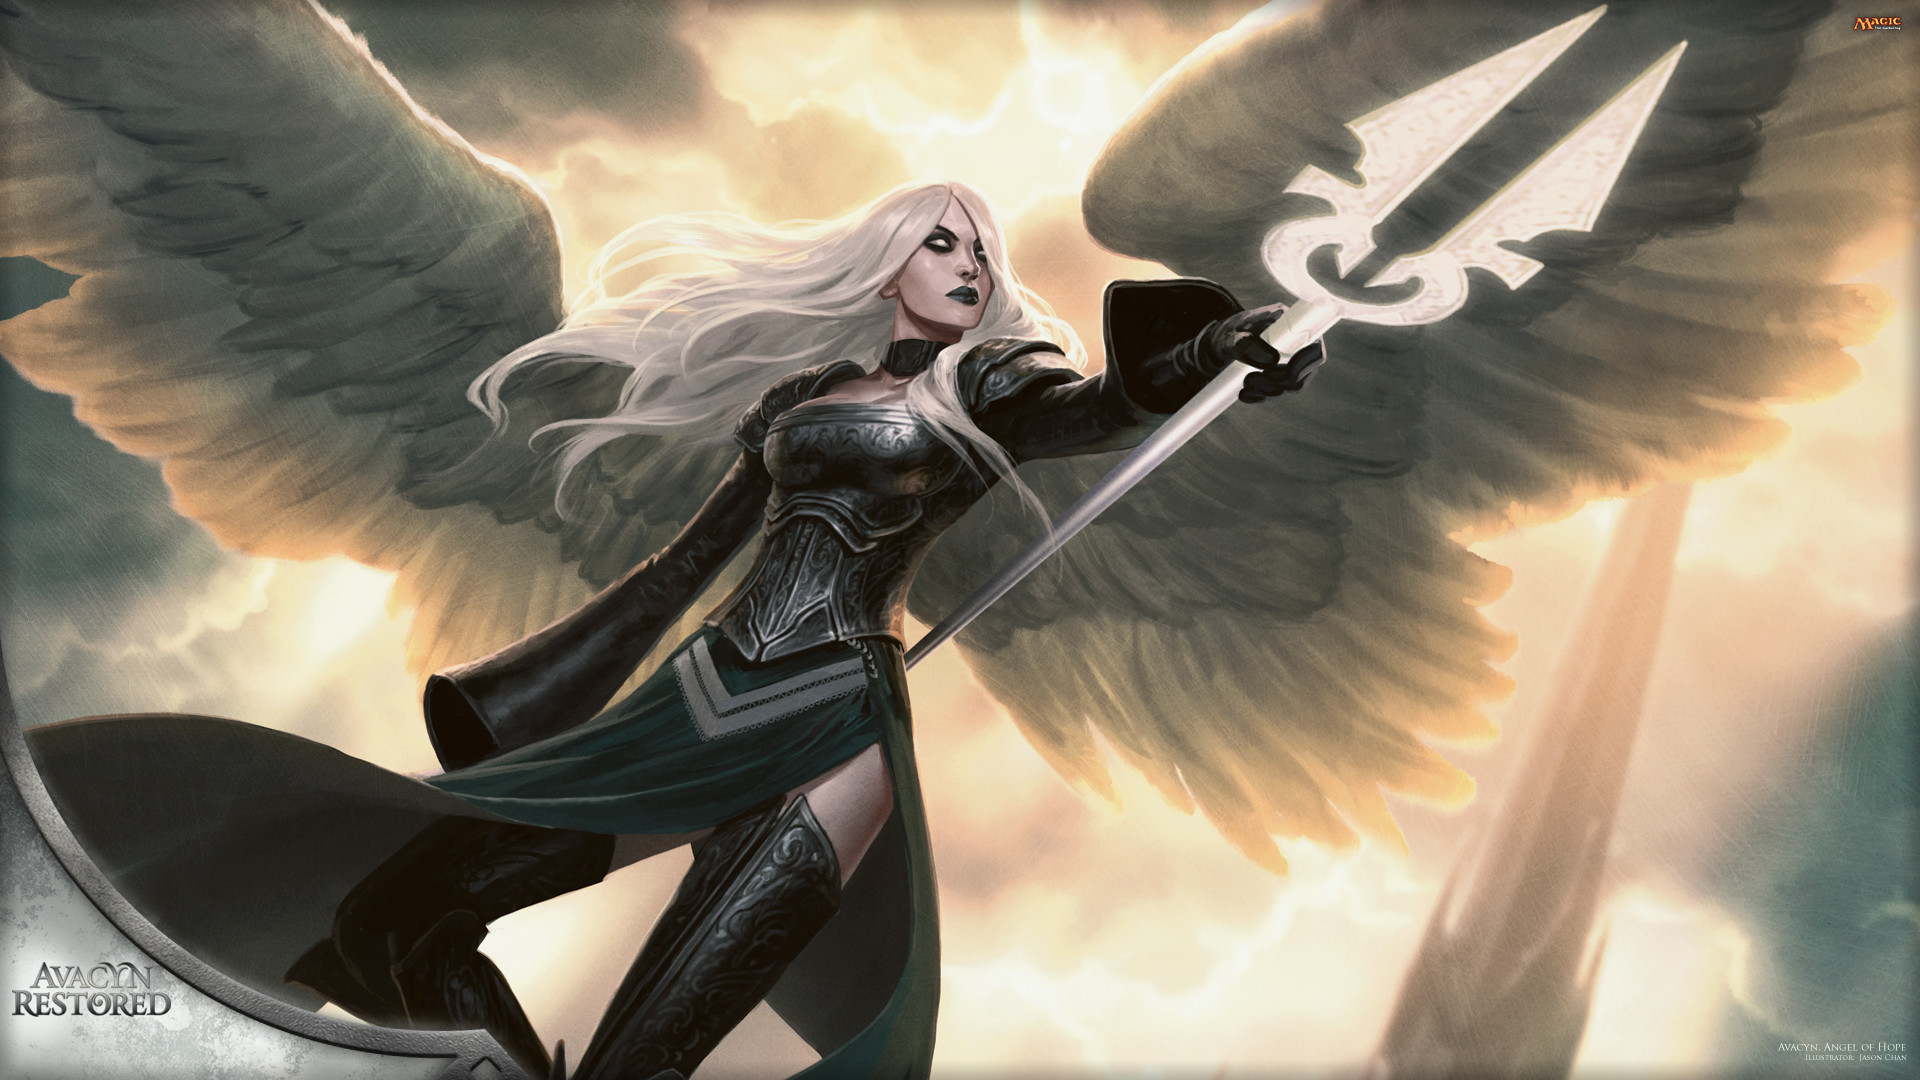 1920x1080 ... Fresh Magic The Gathering Desktop Backgrounds, GsFDcY ...